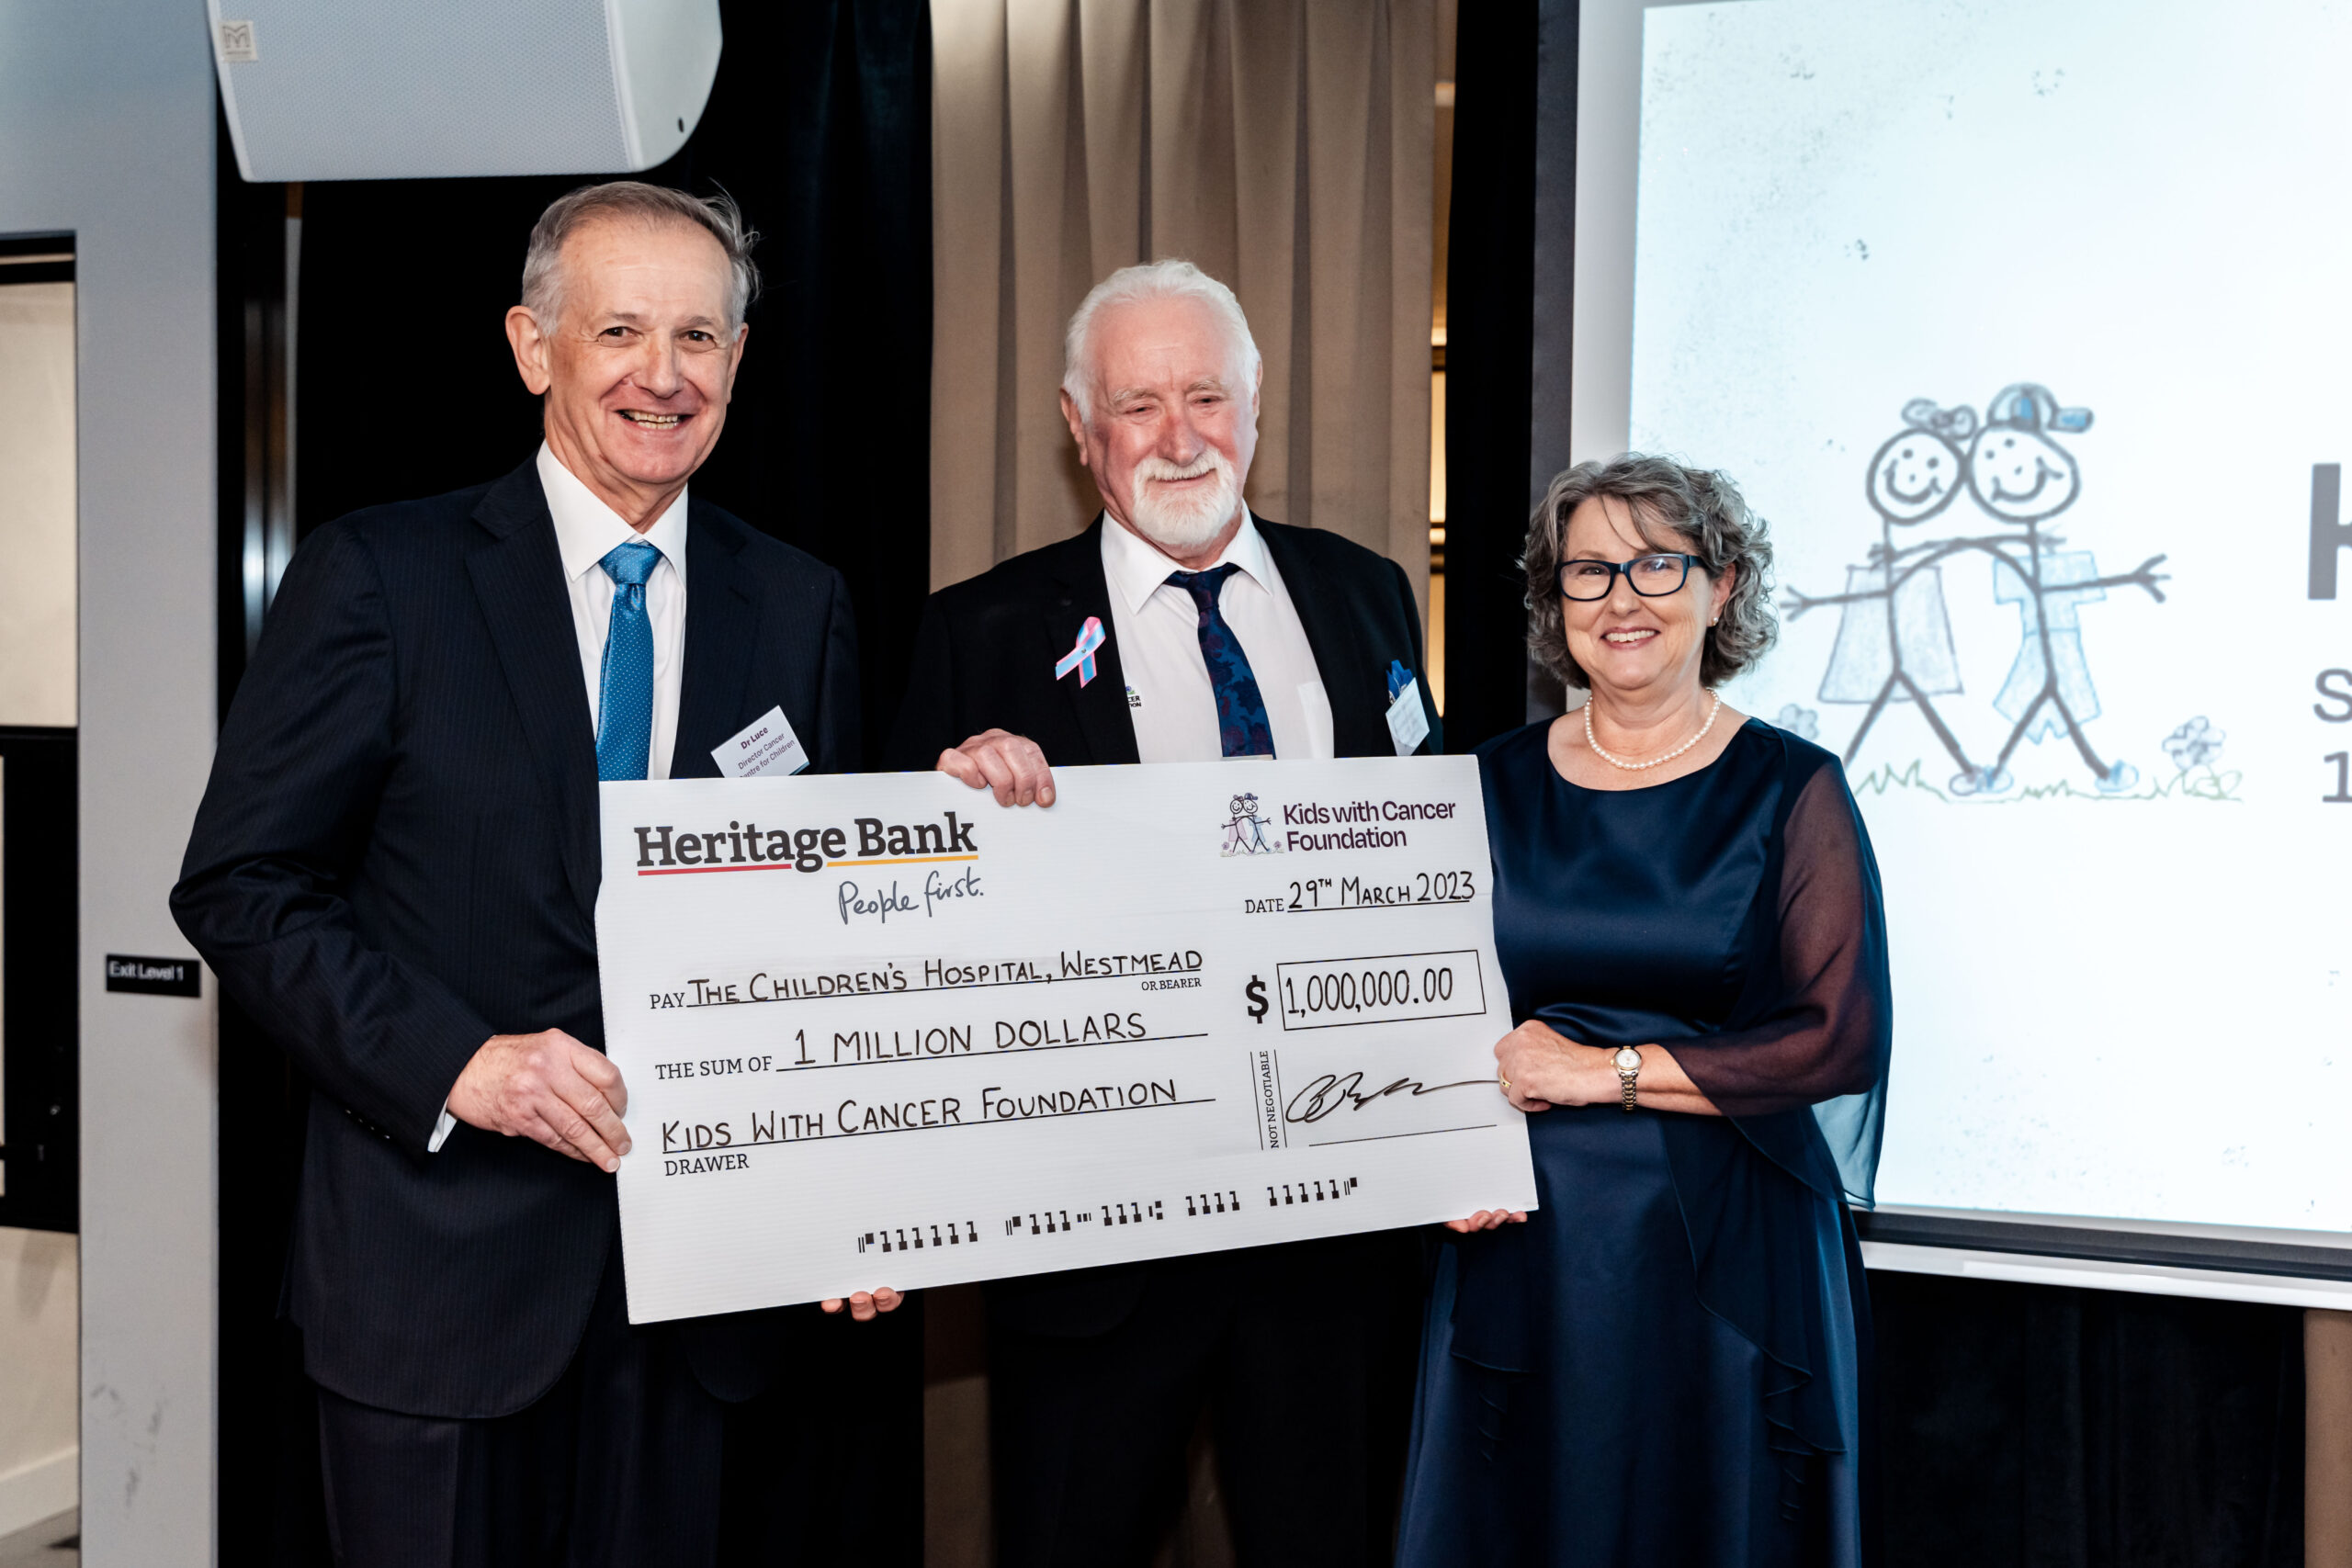 Kids with Cancer Foundation presents cheque to Westmead children's hospital.